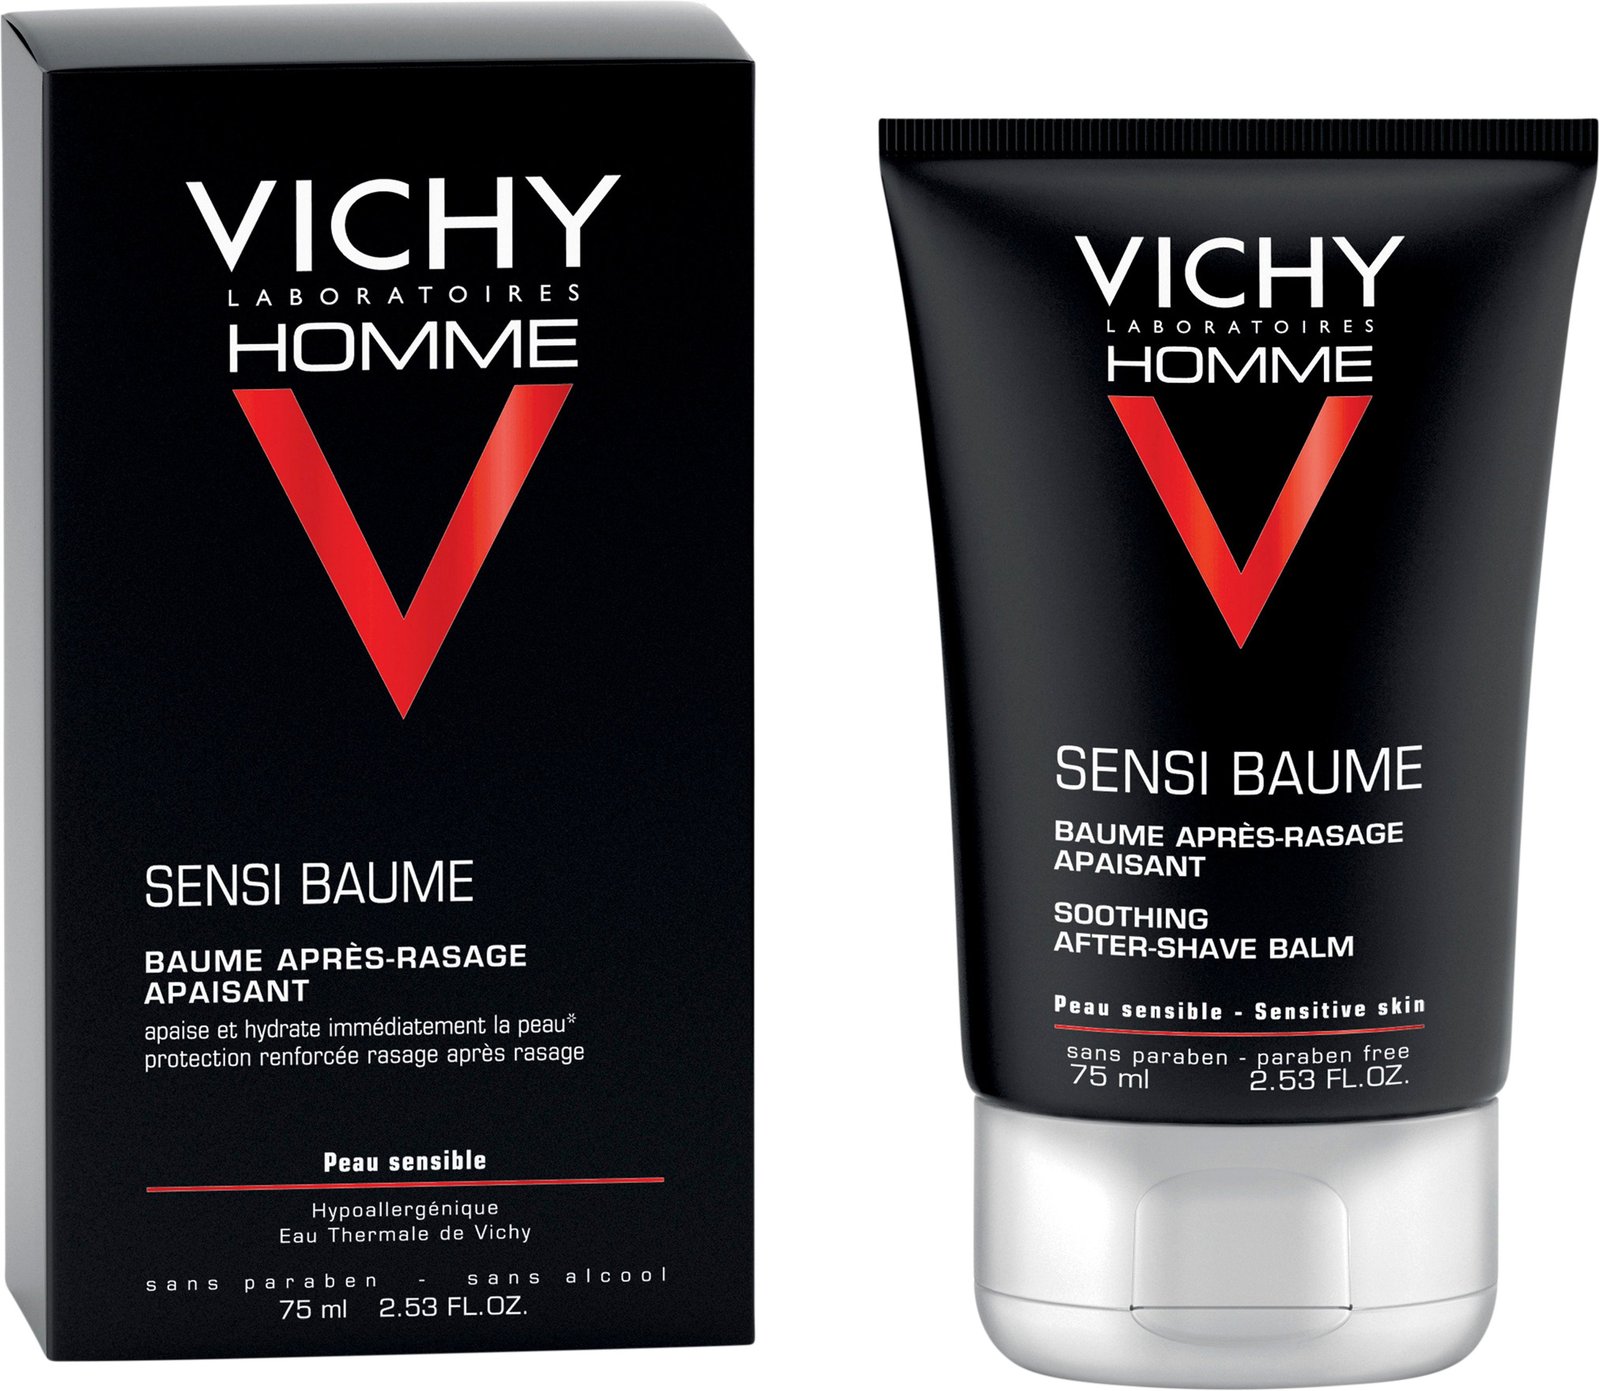 Vichy Homme Sensi-Baume Soothing After-Shave Balm 75 ml